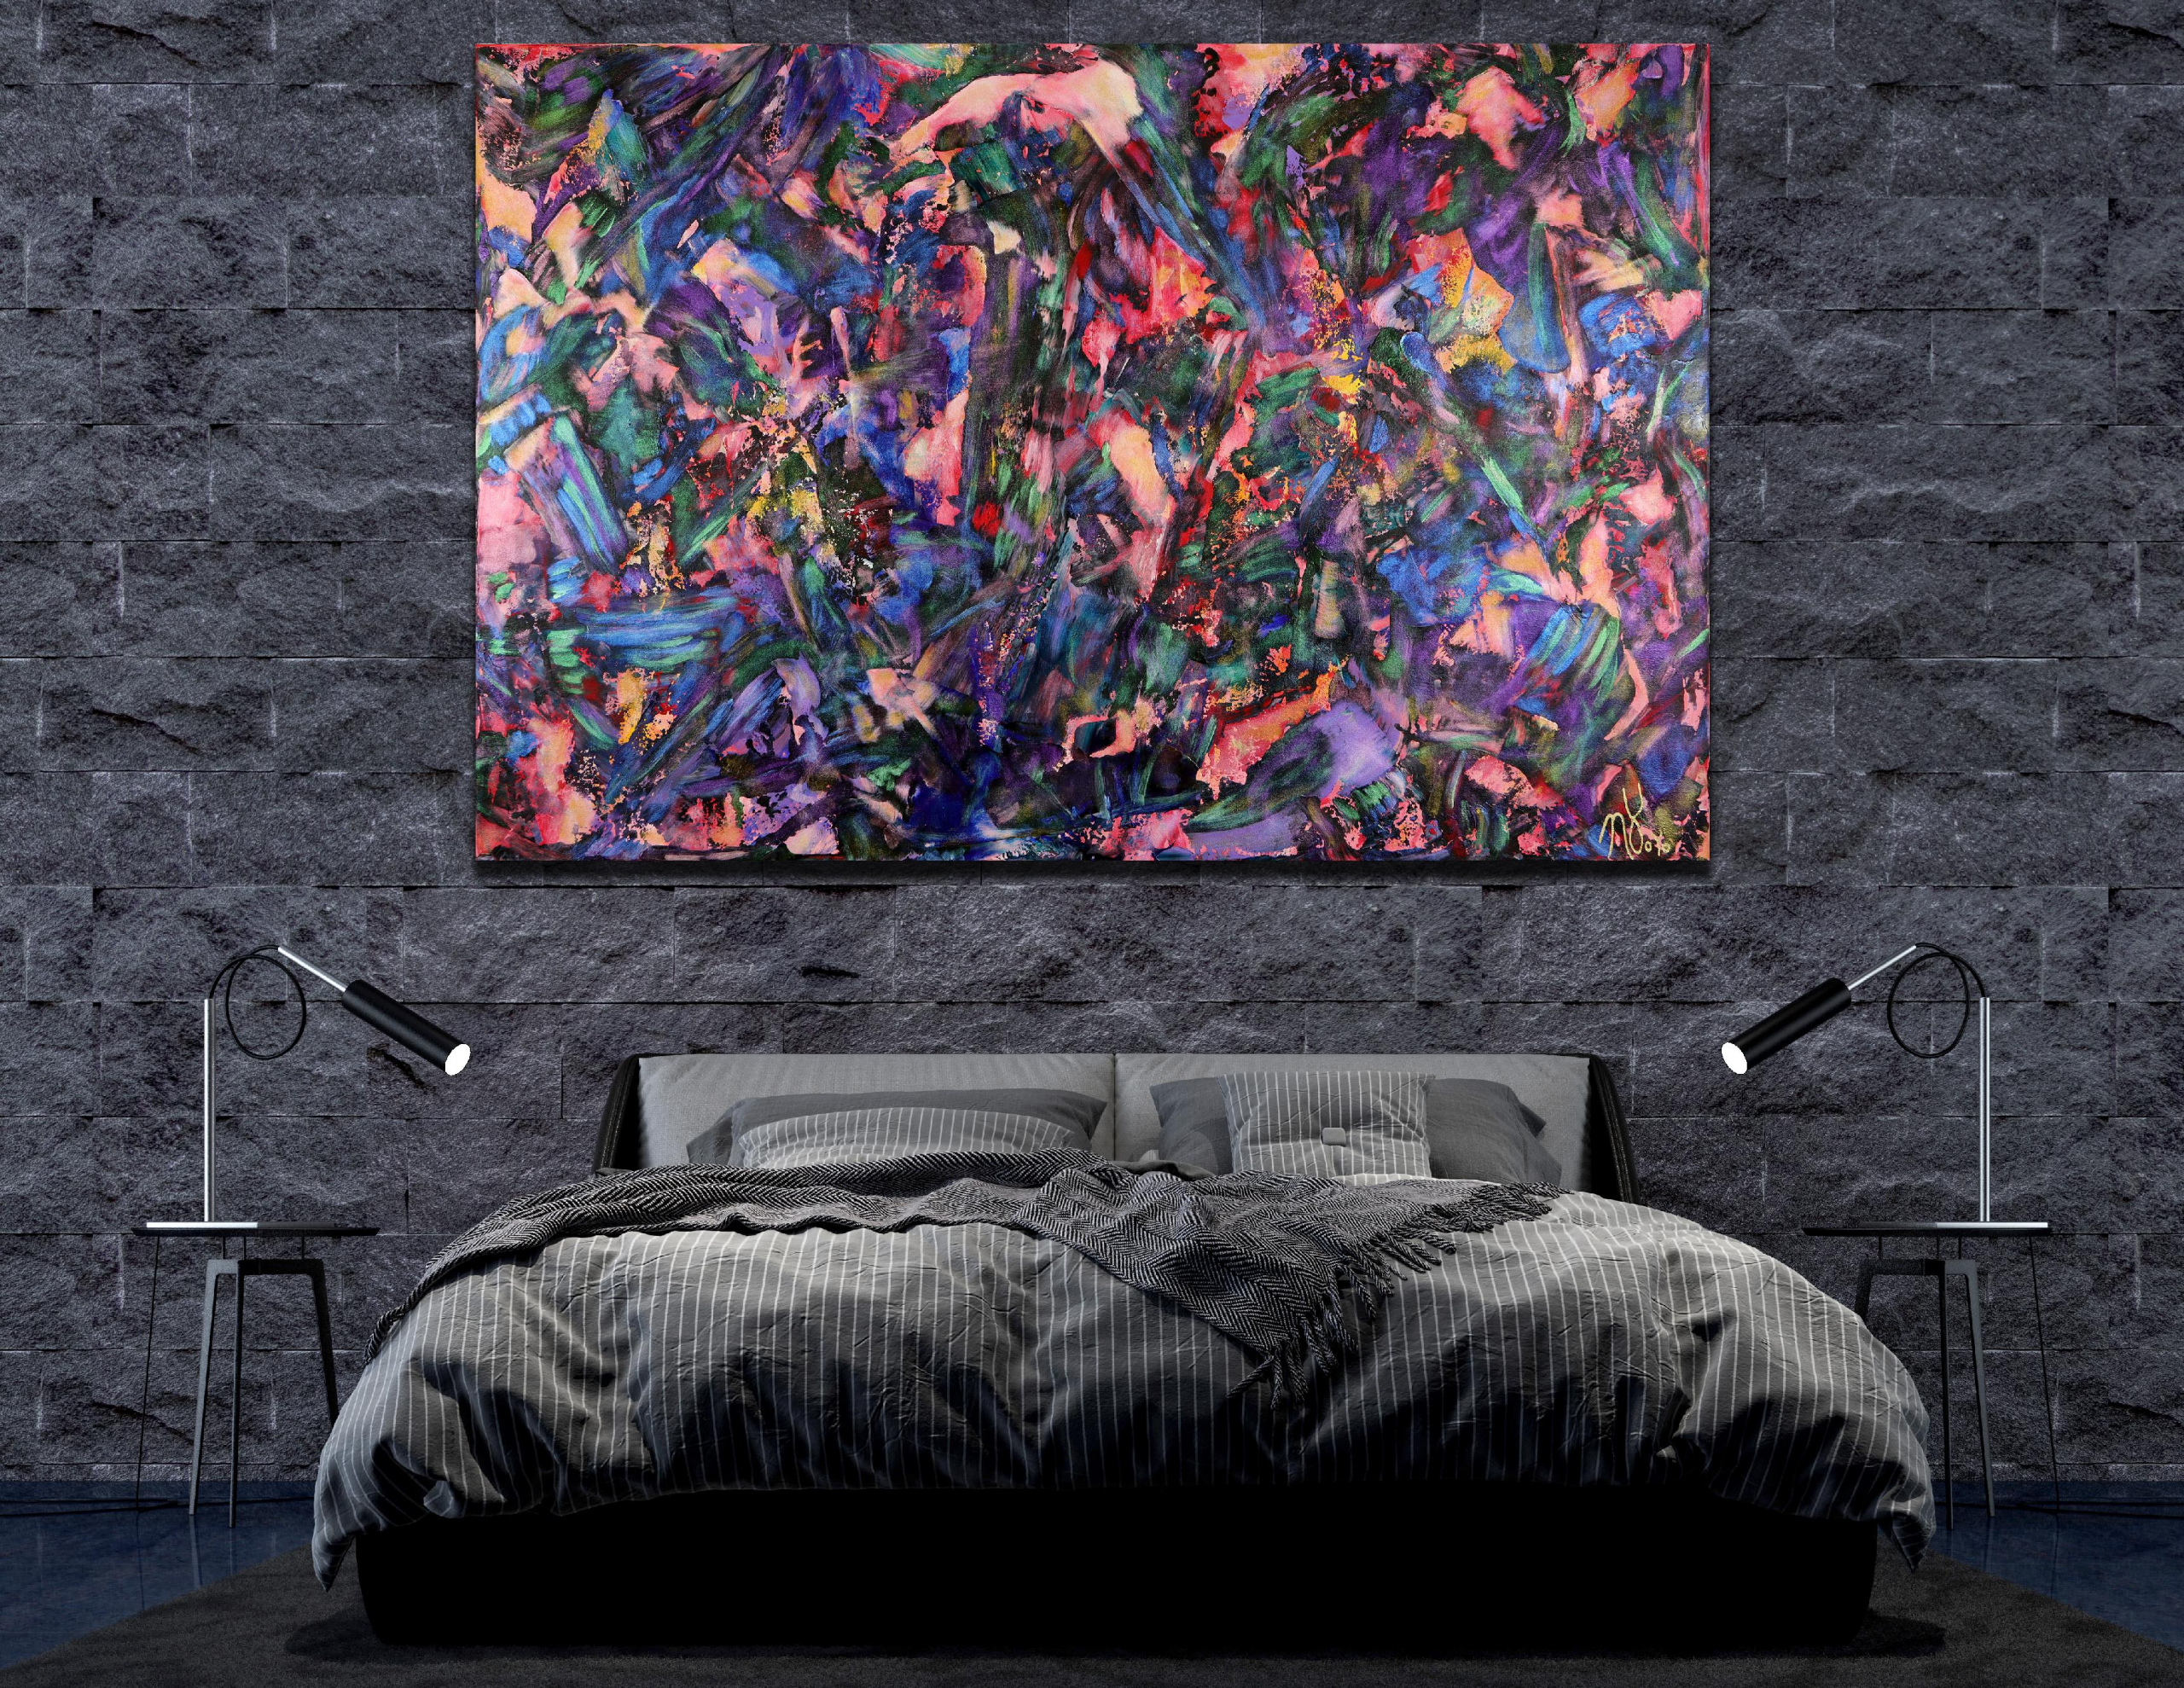 Reflections of Fantasy (2022) / ROOM VIEW / 72 x 48 inches / Nestor Toro